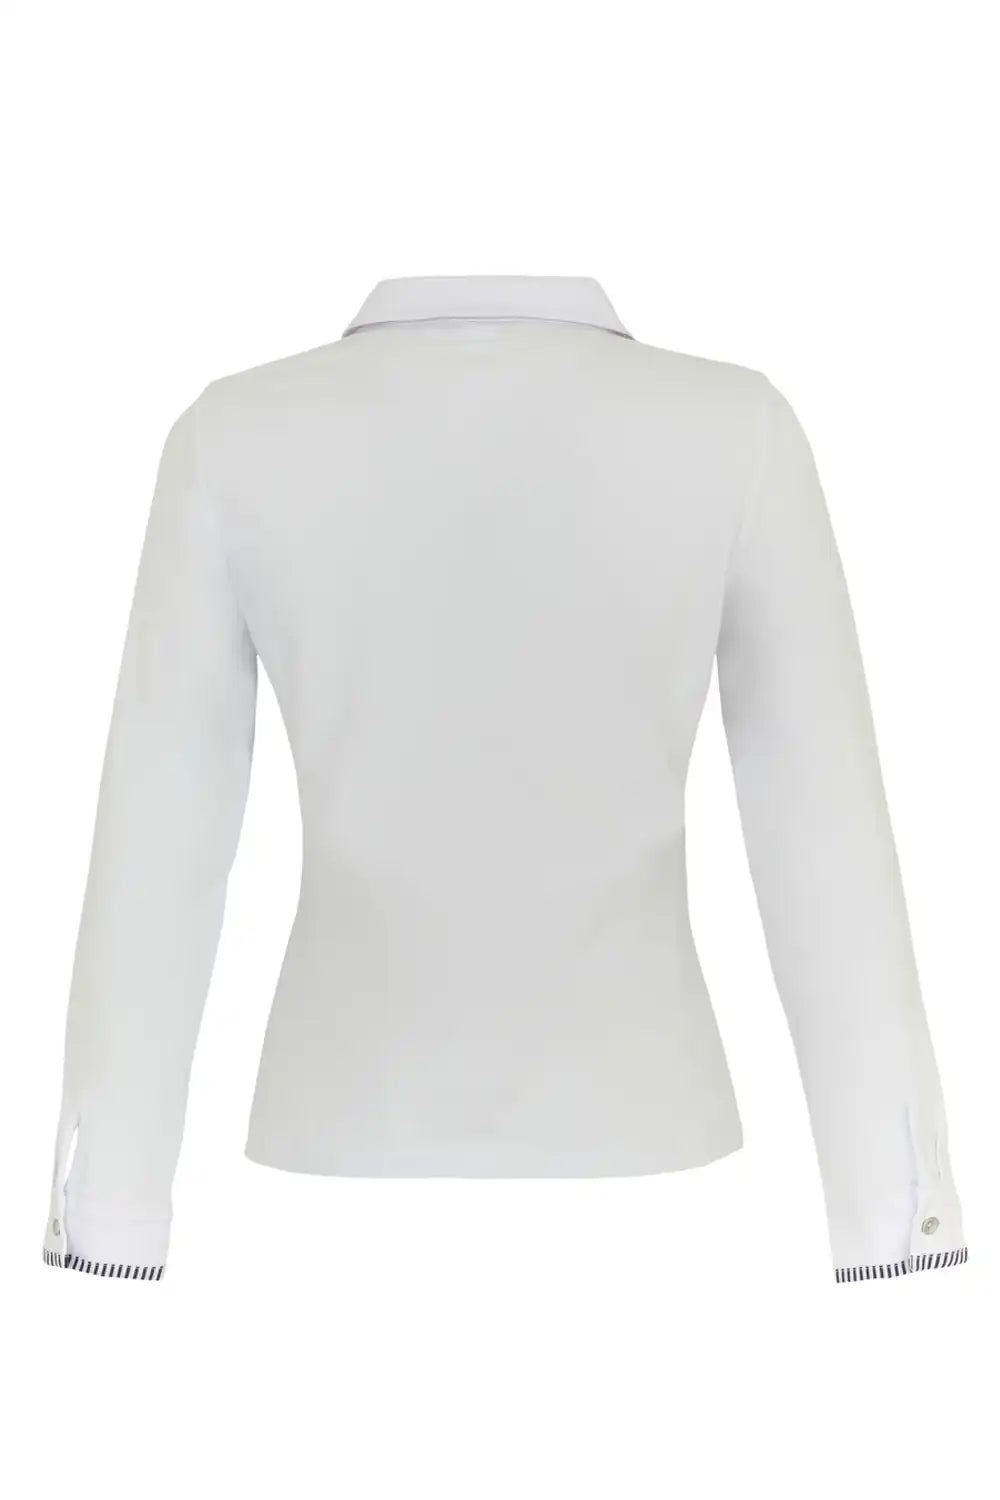 Dolcezza Blouse - Style 24606